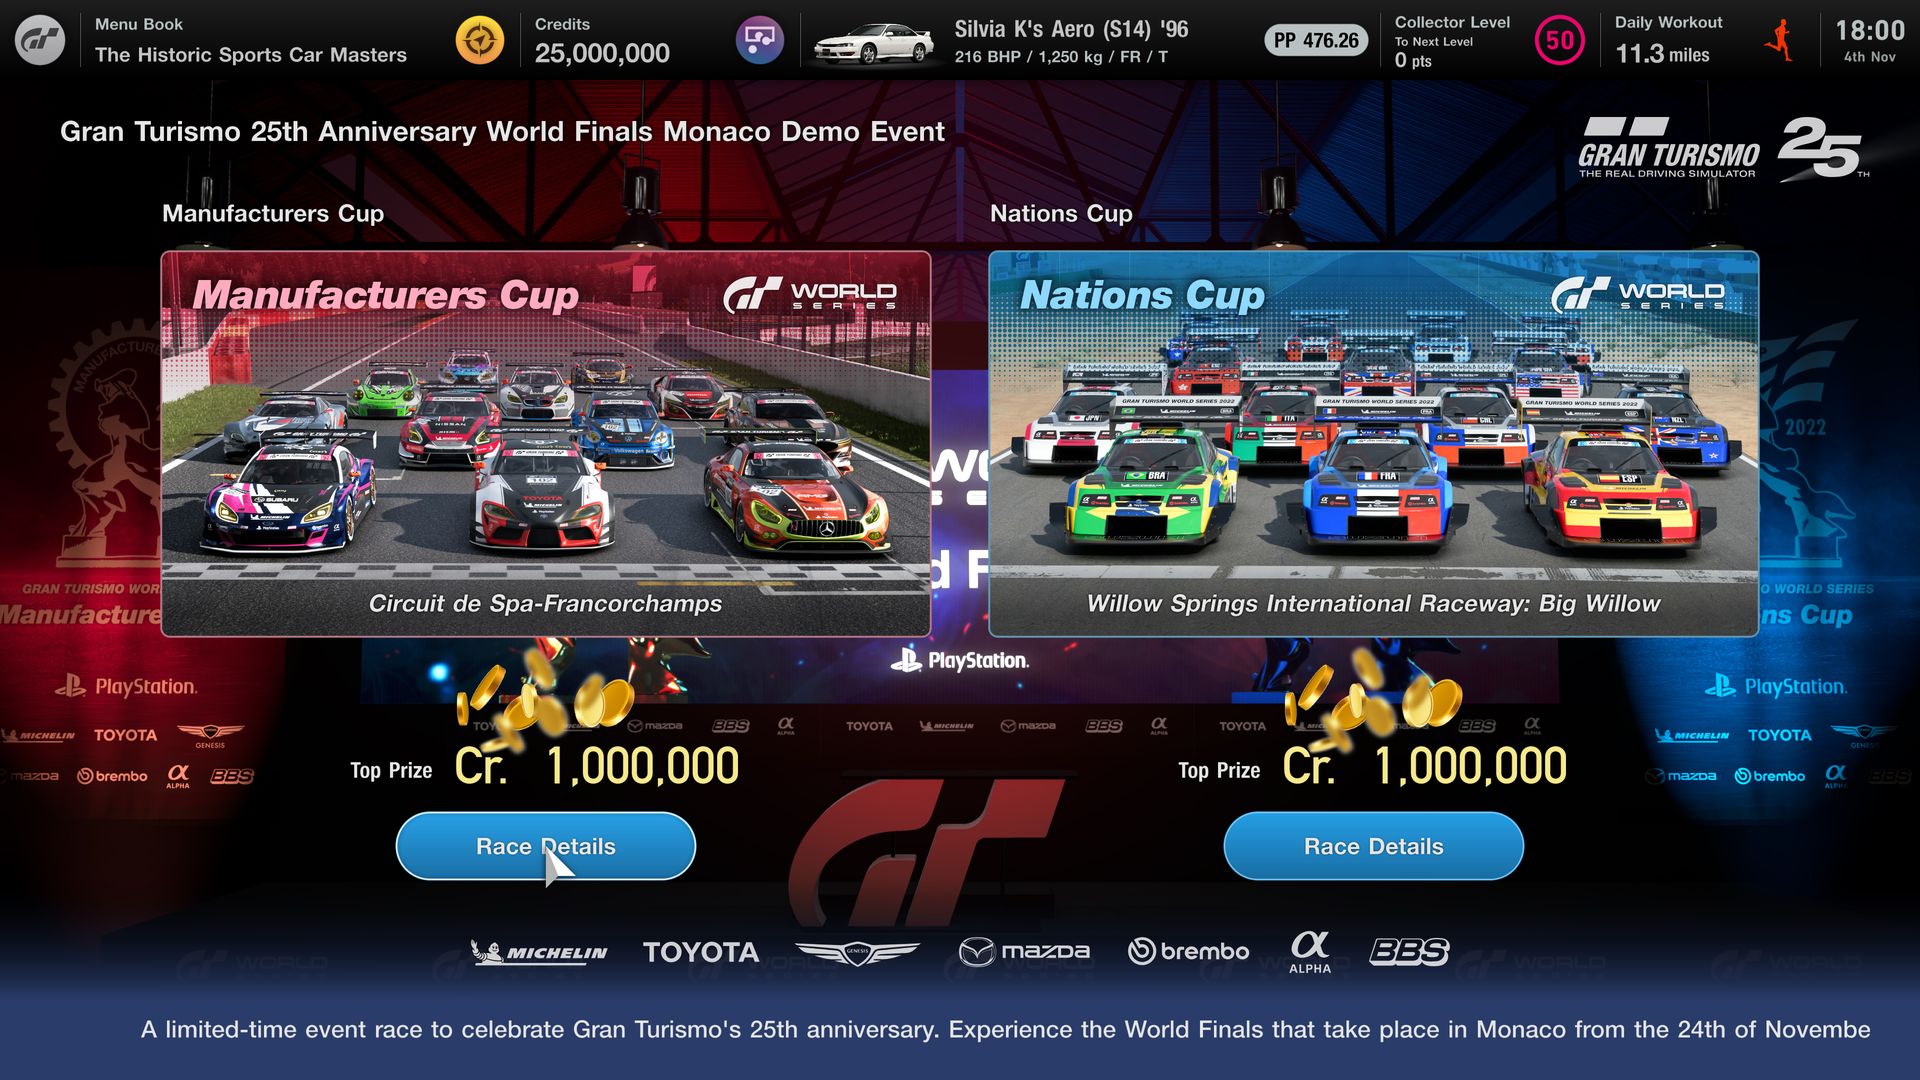 Gran Turismo 7': New Offers, Freebies in Celebration of the Franchise's 25th  Anniversary